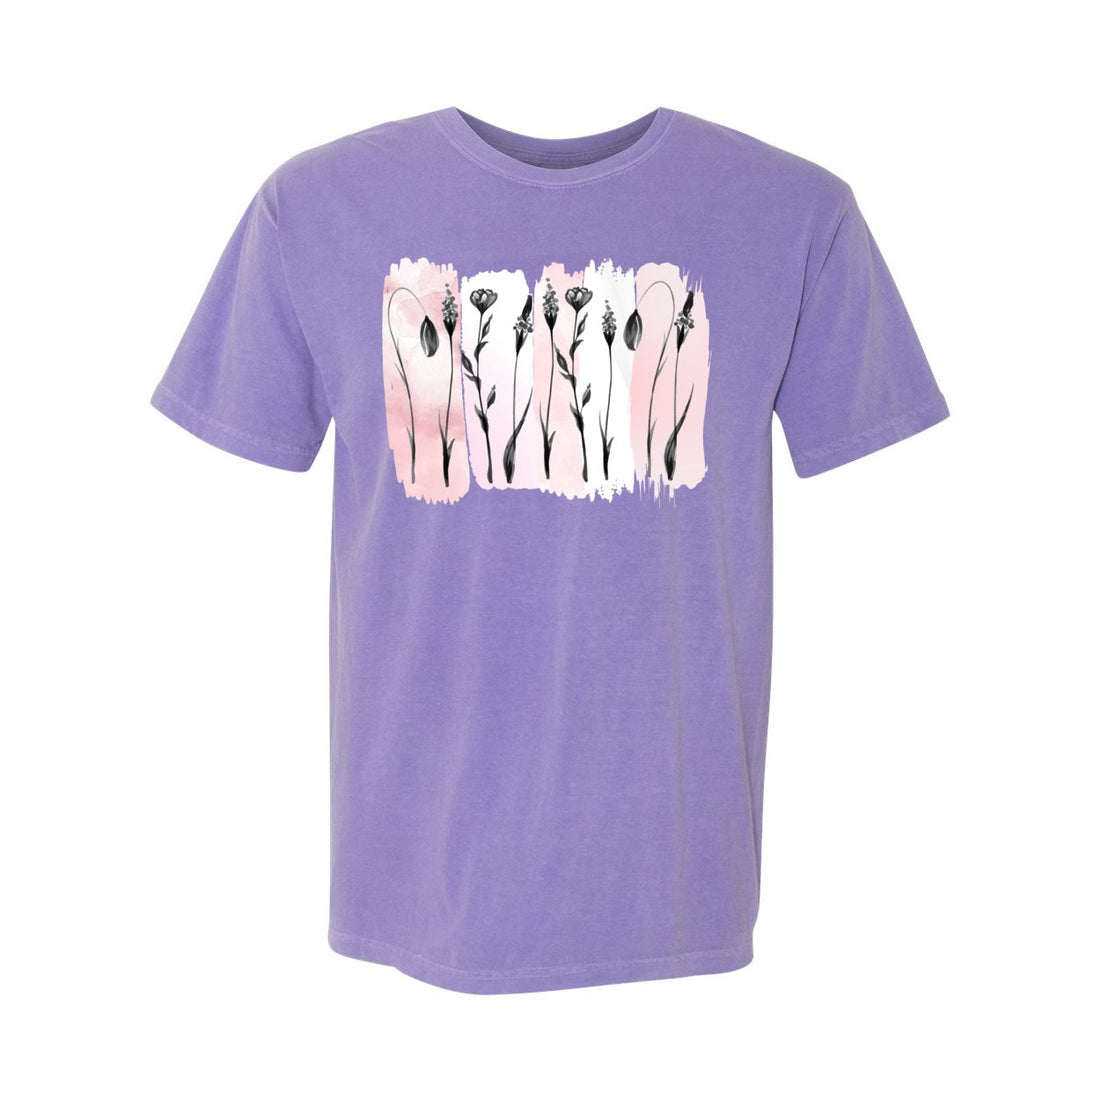 Dainty Flowers Comfort Colors Tee - T-Shirts - Positively Sassy - Dainty Flowers Comfort Colors Tee